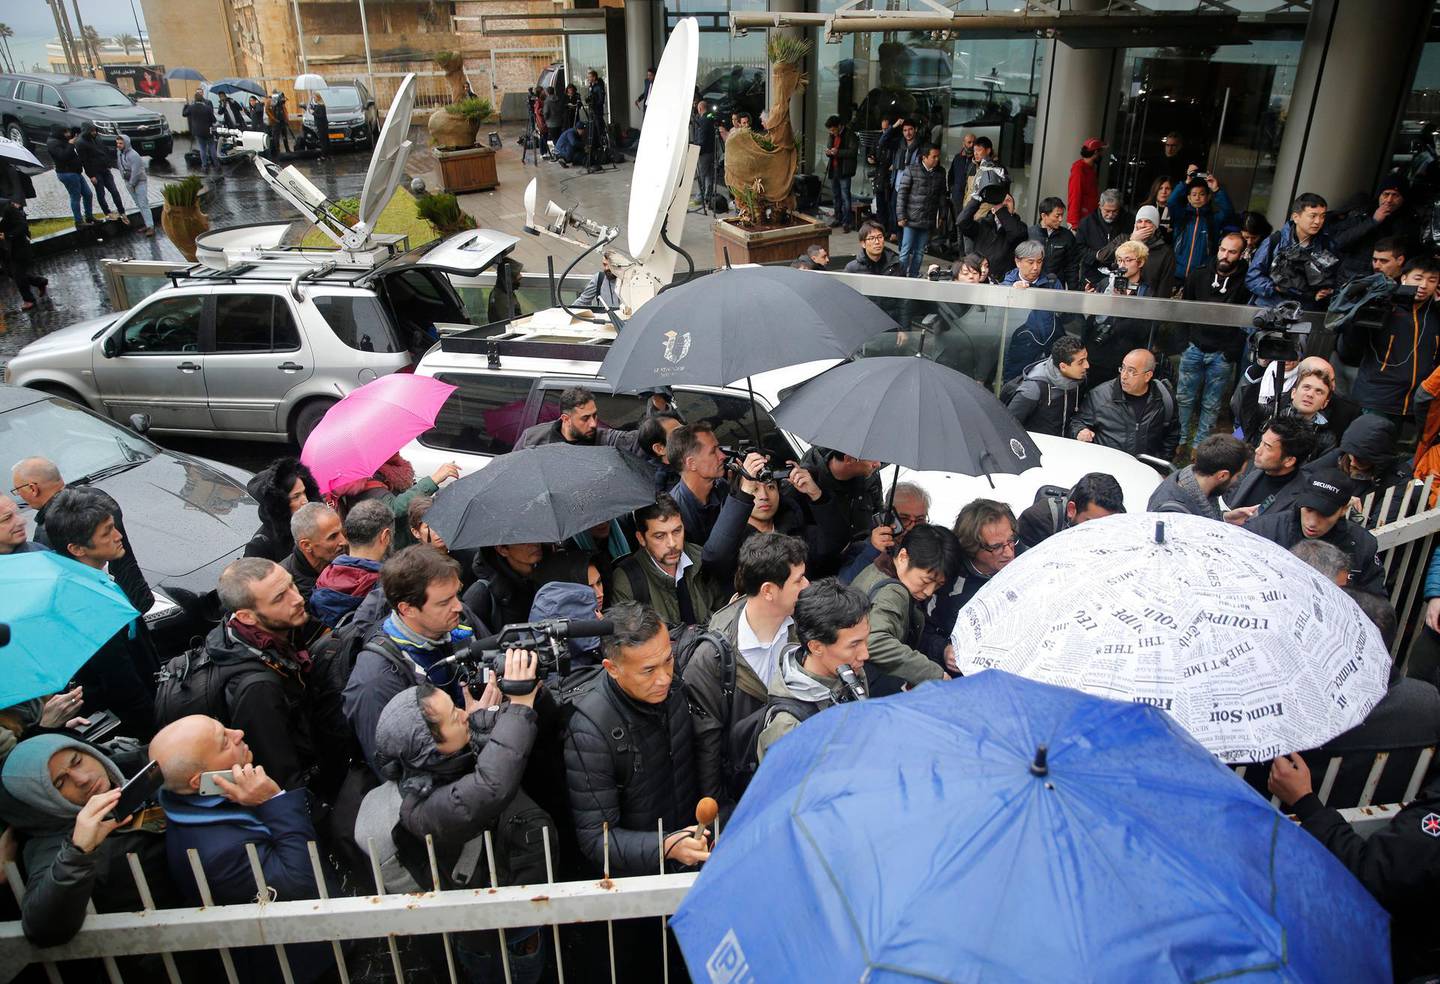 Journalists line up to enter the Lebanese Journalists Syndicate building, where ex-Nissan chief Carlos Ghosn is scheduled to hold a press conference, in Beirut, Lebanon, Wednesday, Jan. 8, 2020. The disgraced former chairman of Nissan is expected to speak to journalists in Beirut, more than a week after his dramatic escape from Japan ahead of his trial for alleged financial misconduct. (AP Photo/Hussein Malla)